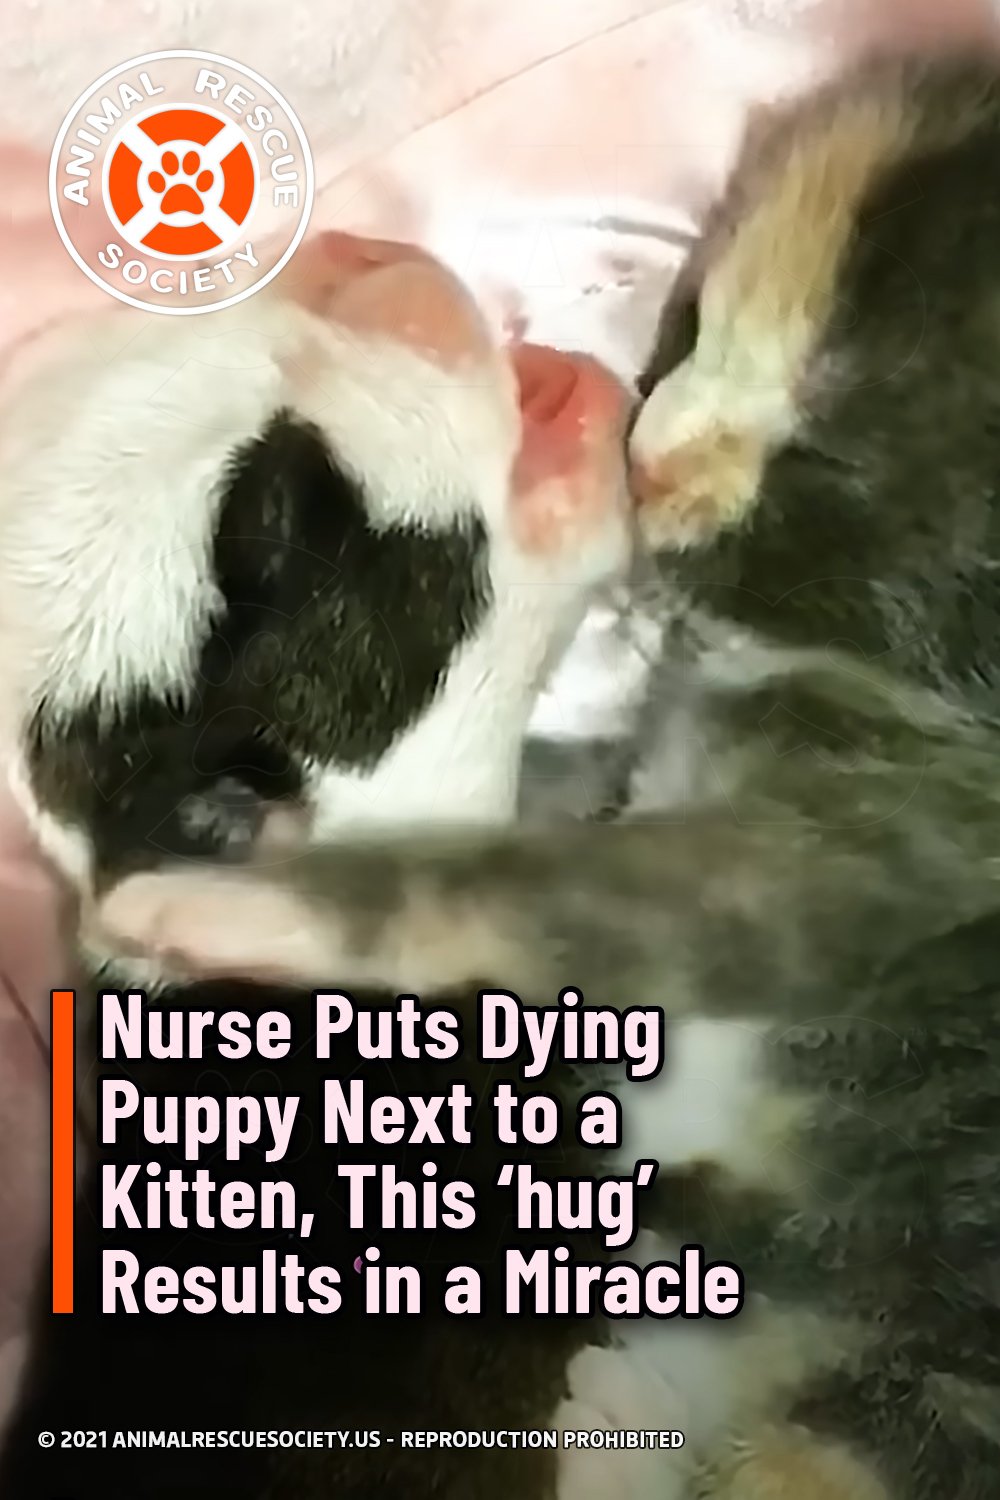 Nurse Puts Dying Puppy Next to a Kitten, This ‘hug’ Results in a Miracle